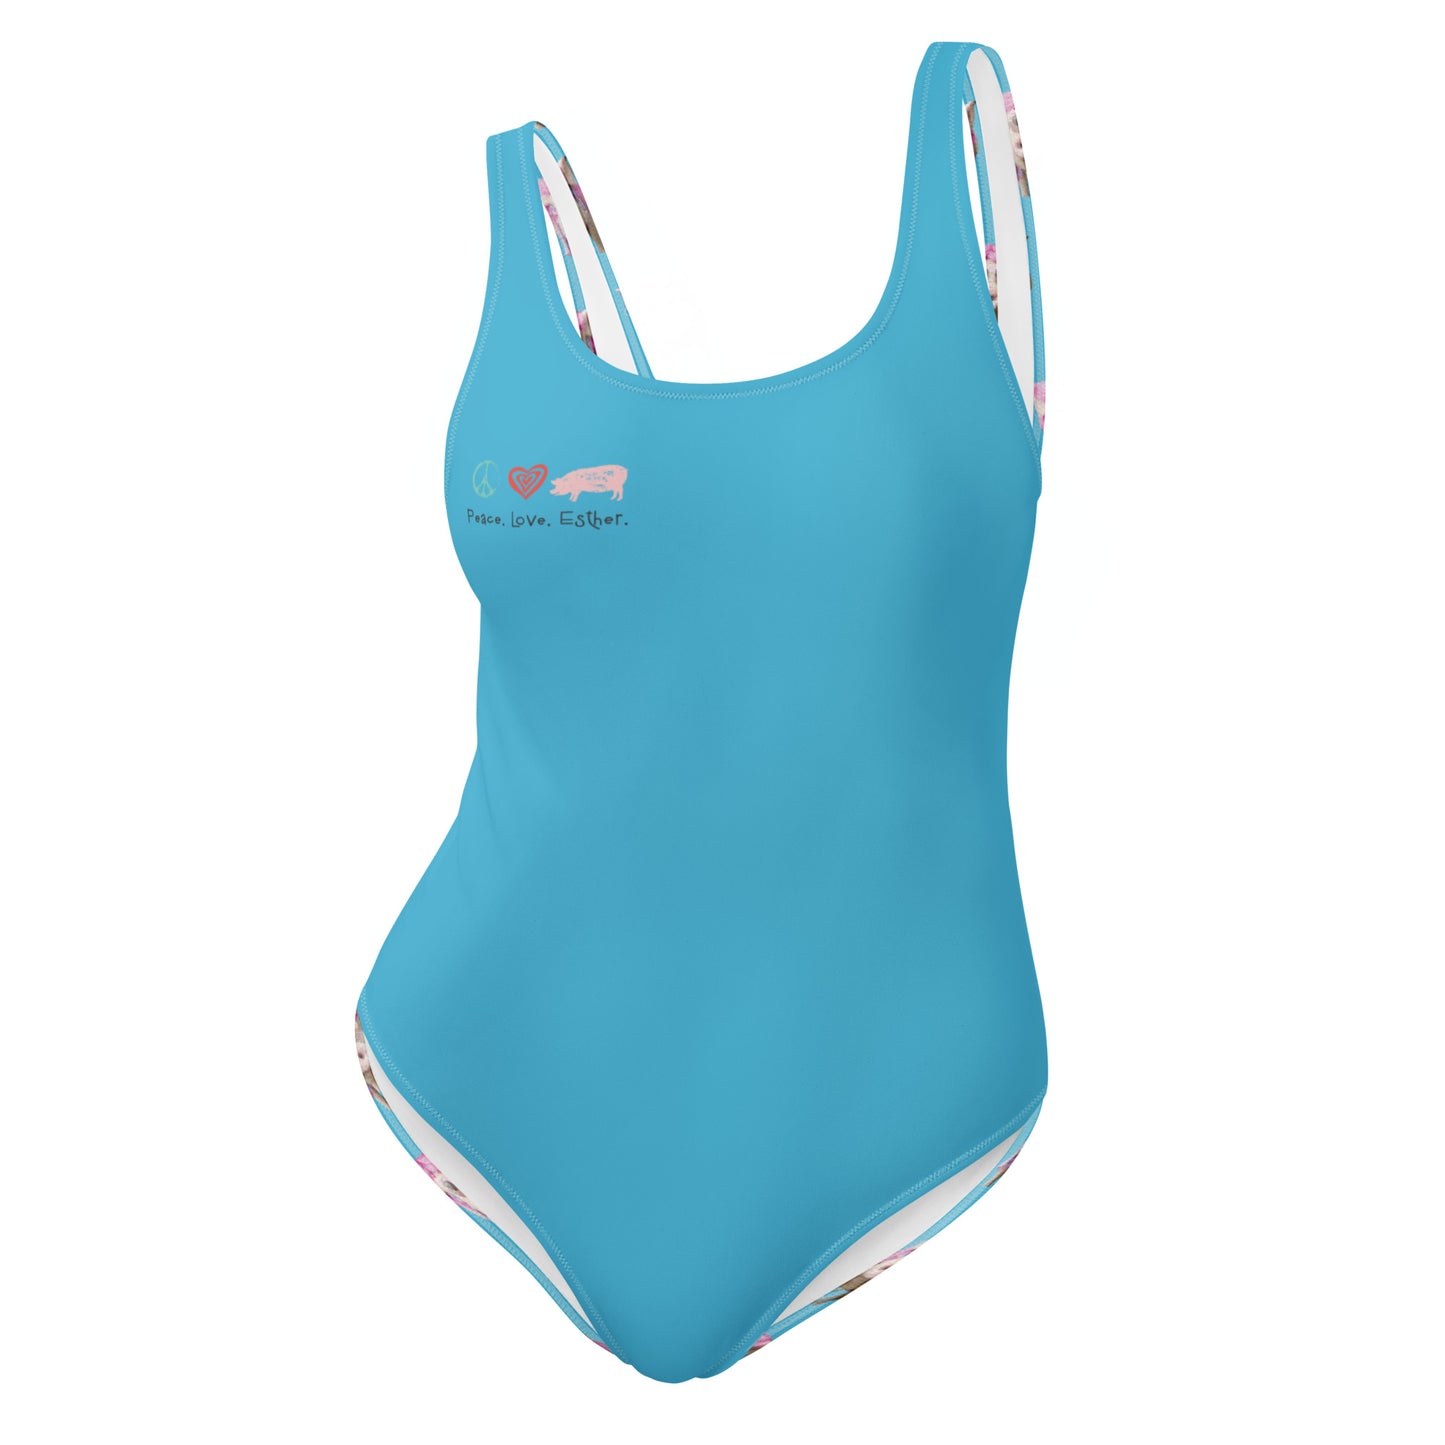 NEW -I Love you more than cupcakes -One-Piece -Adult -Swimsuit- Blue